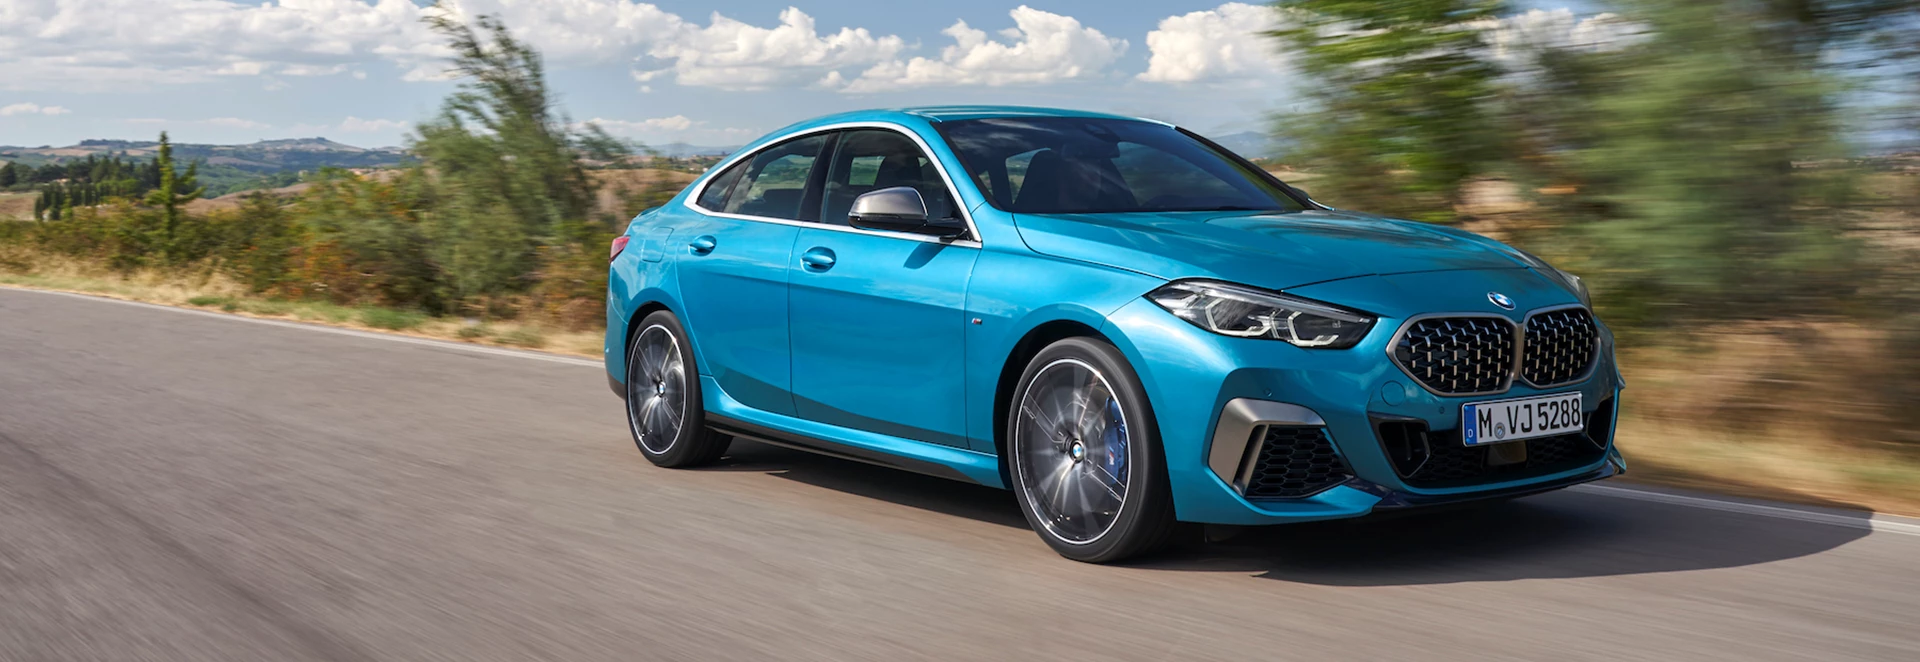 Why you should test drive the new BMW 2 Series Gran Coupe